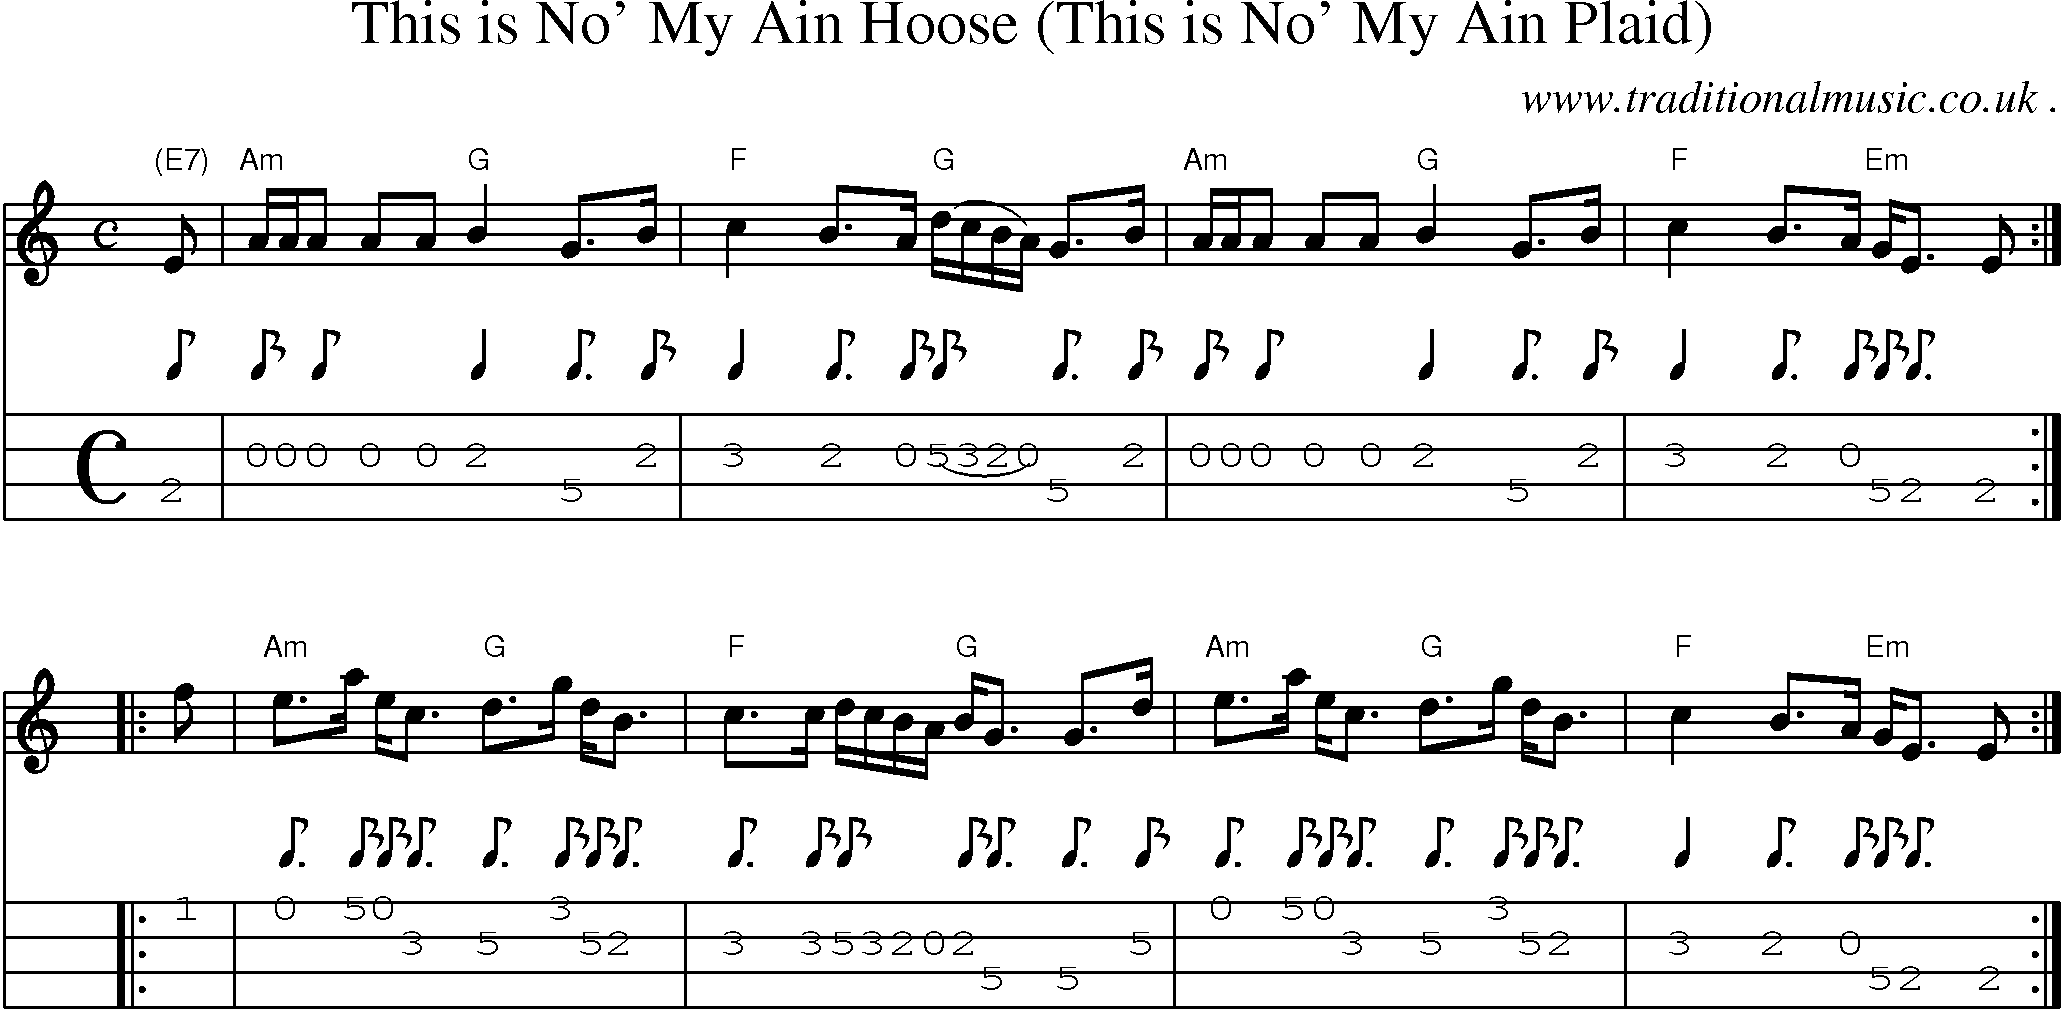 Sheet-music  score, Chords and Mandolin Tabs for This Is No My Ain Hoose This Is No My Ain Plaid